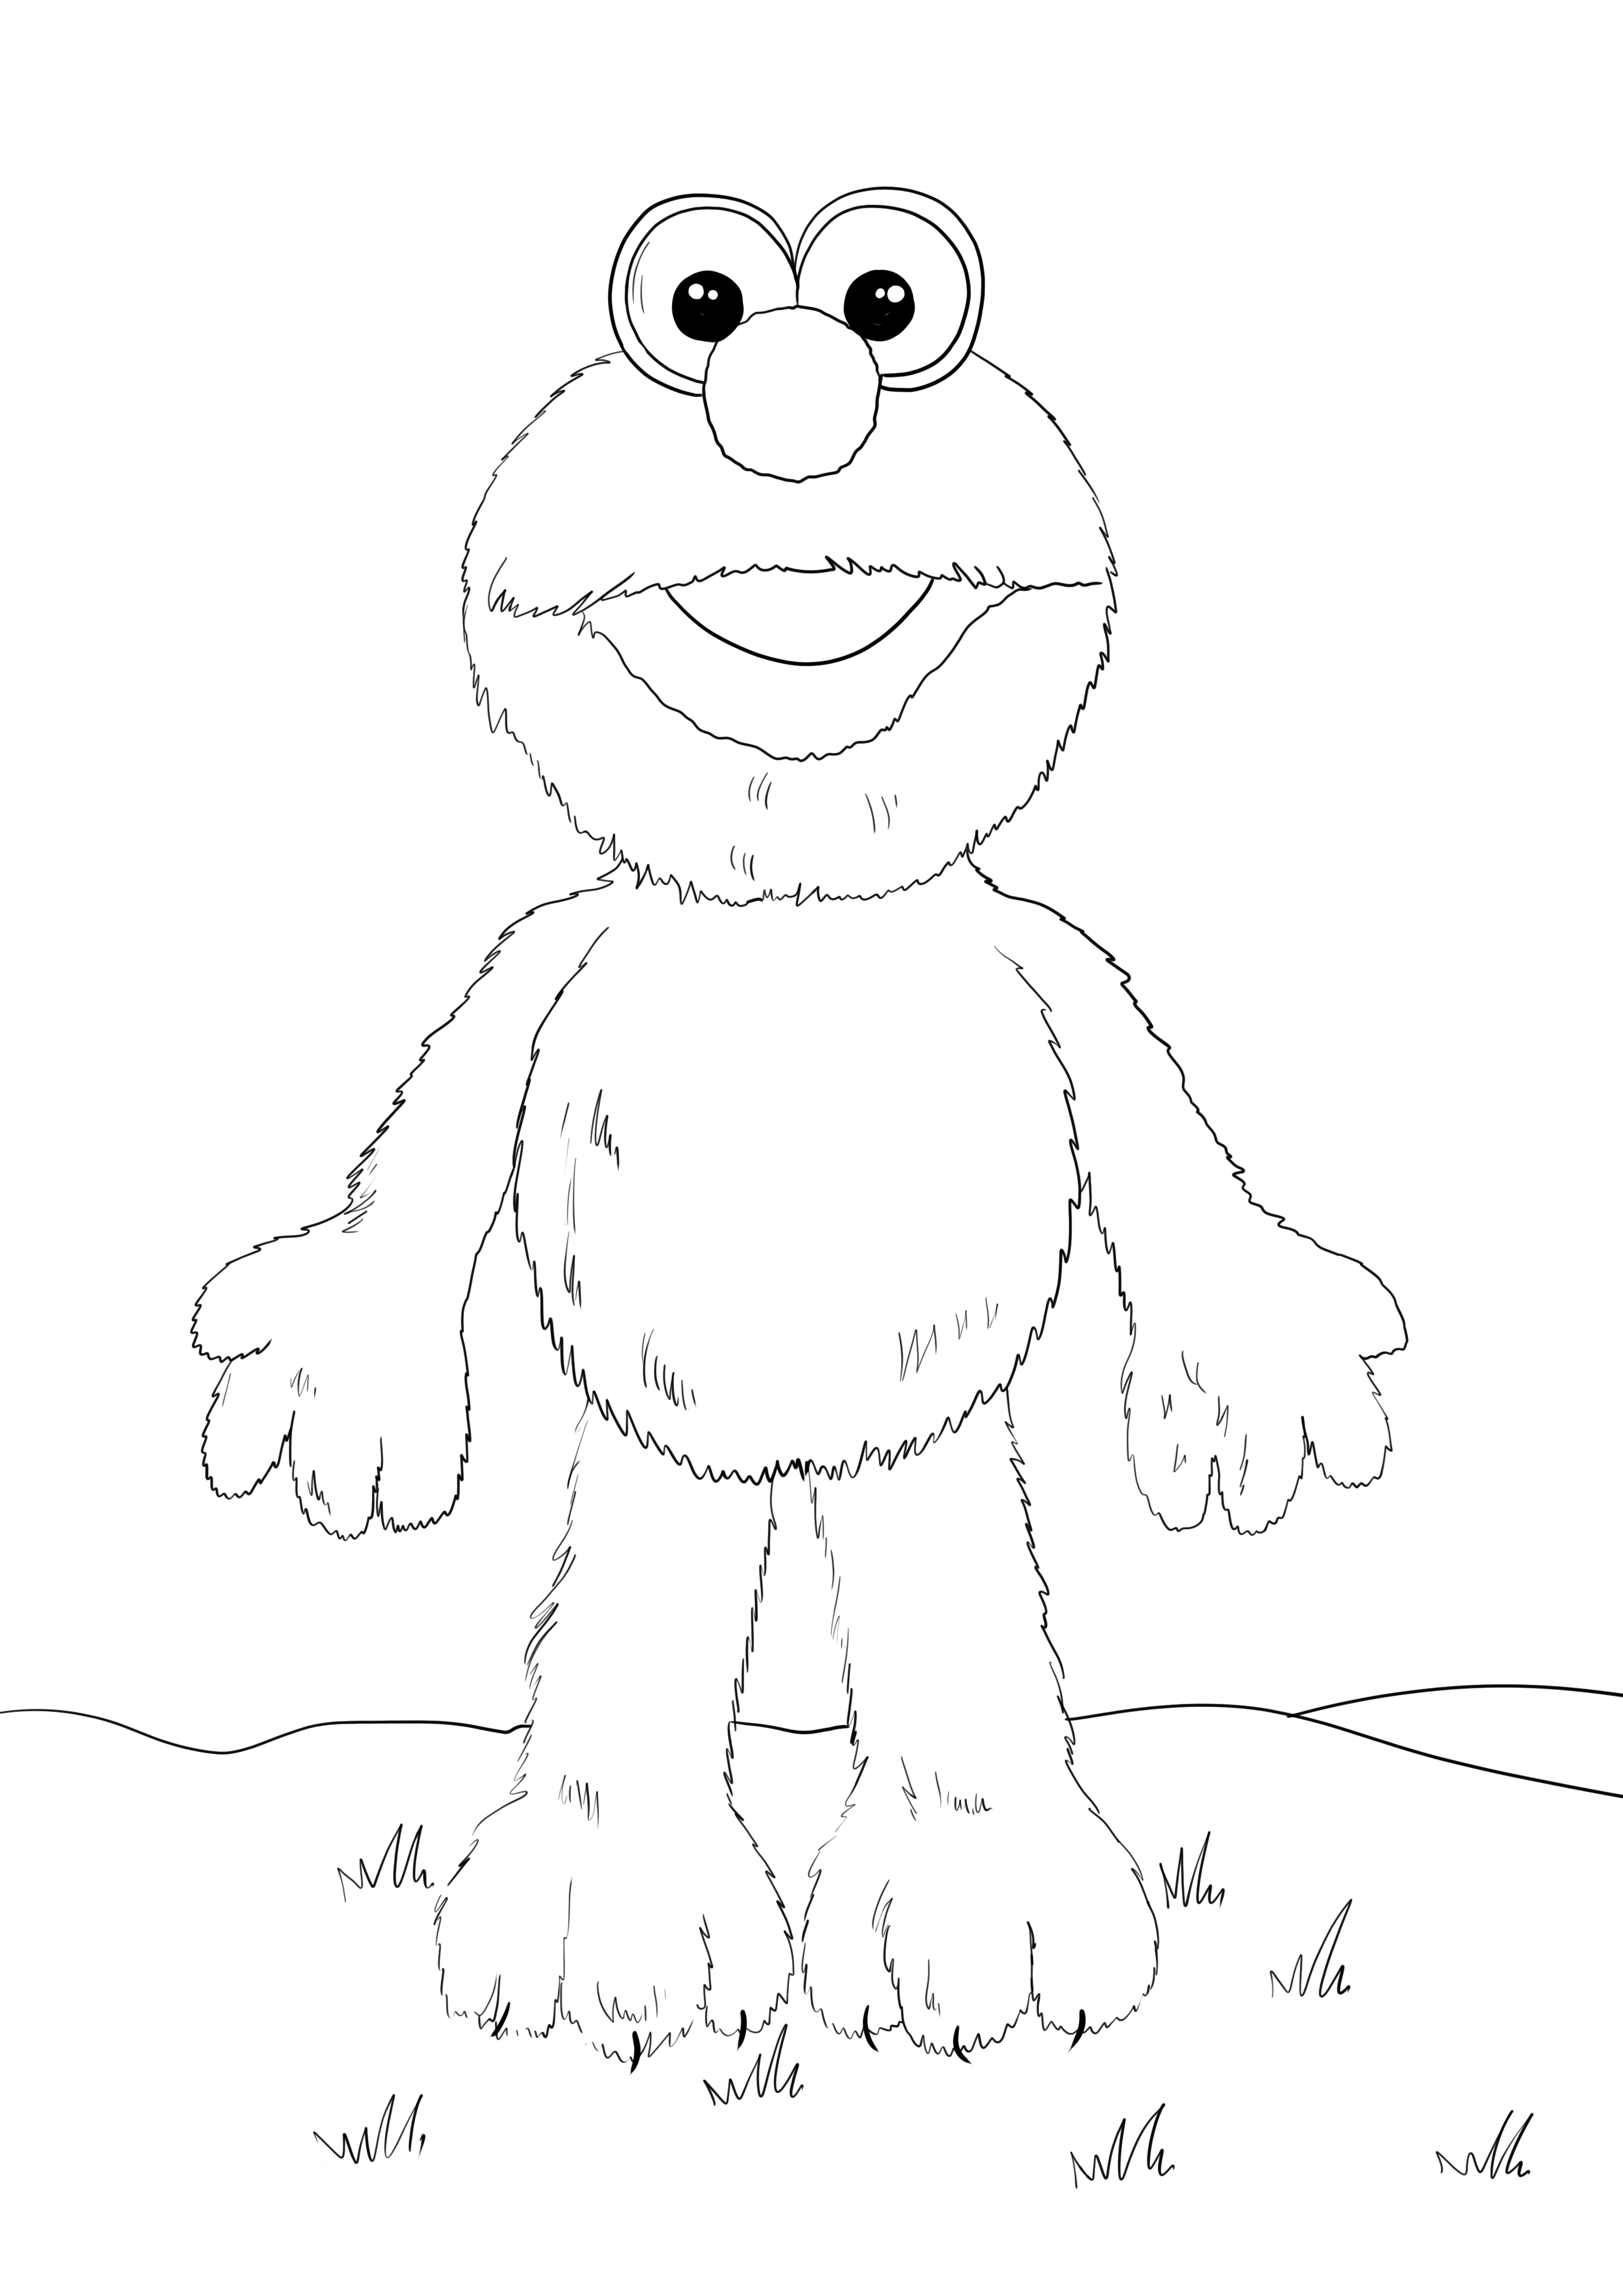 110+ Elmo Coloring Pages: Playful and Educational Fun 1